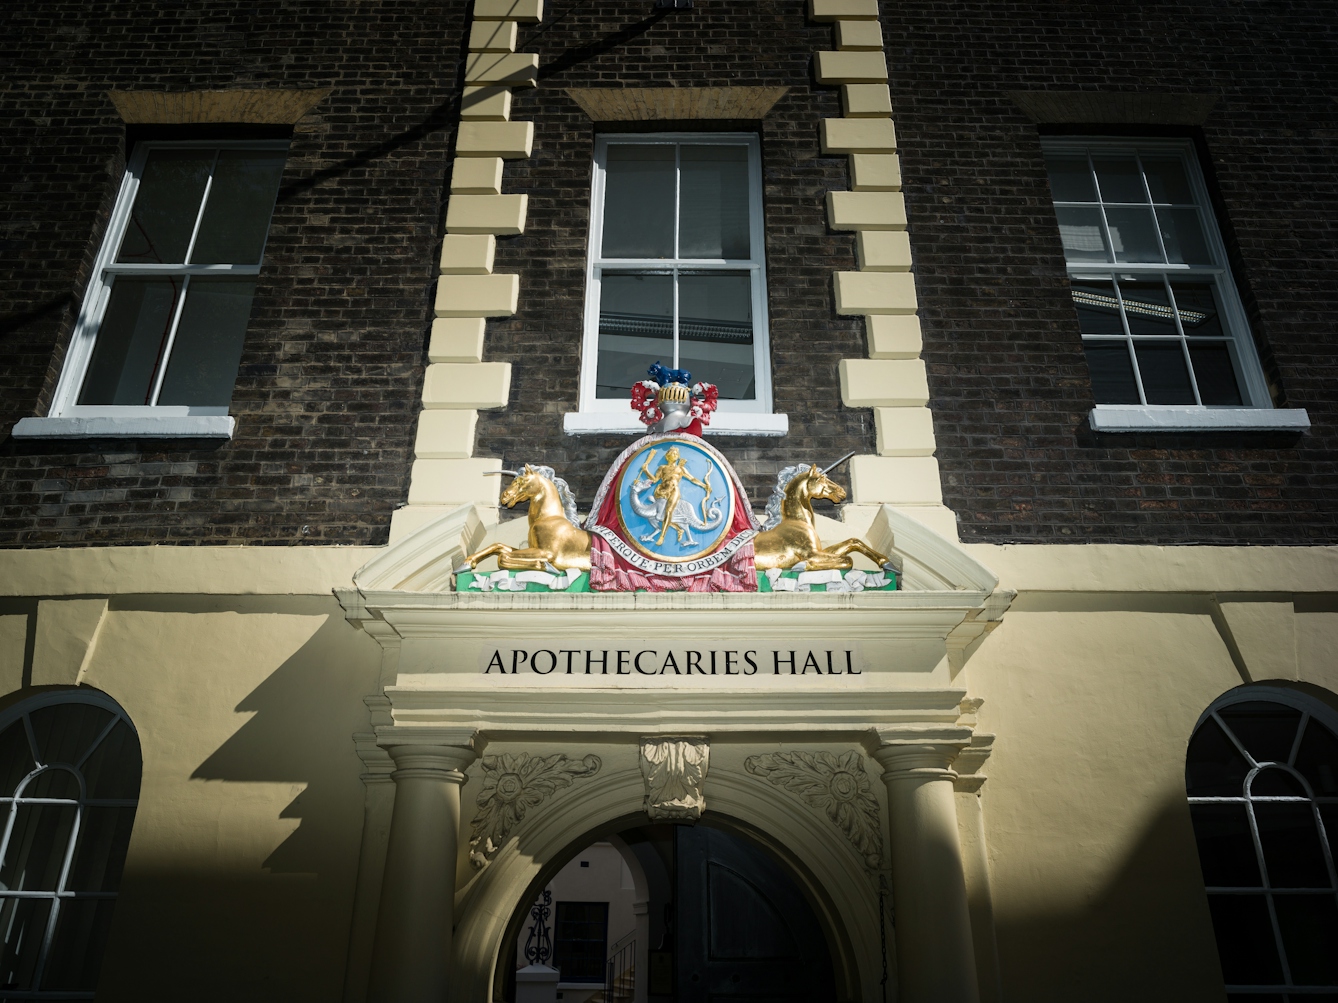 Coat of arms about Apothecaries Hall in London, featuring two unicorns.